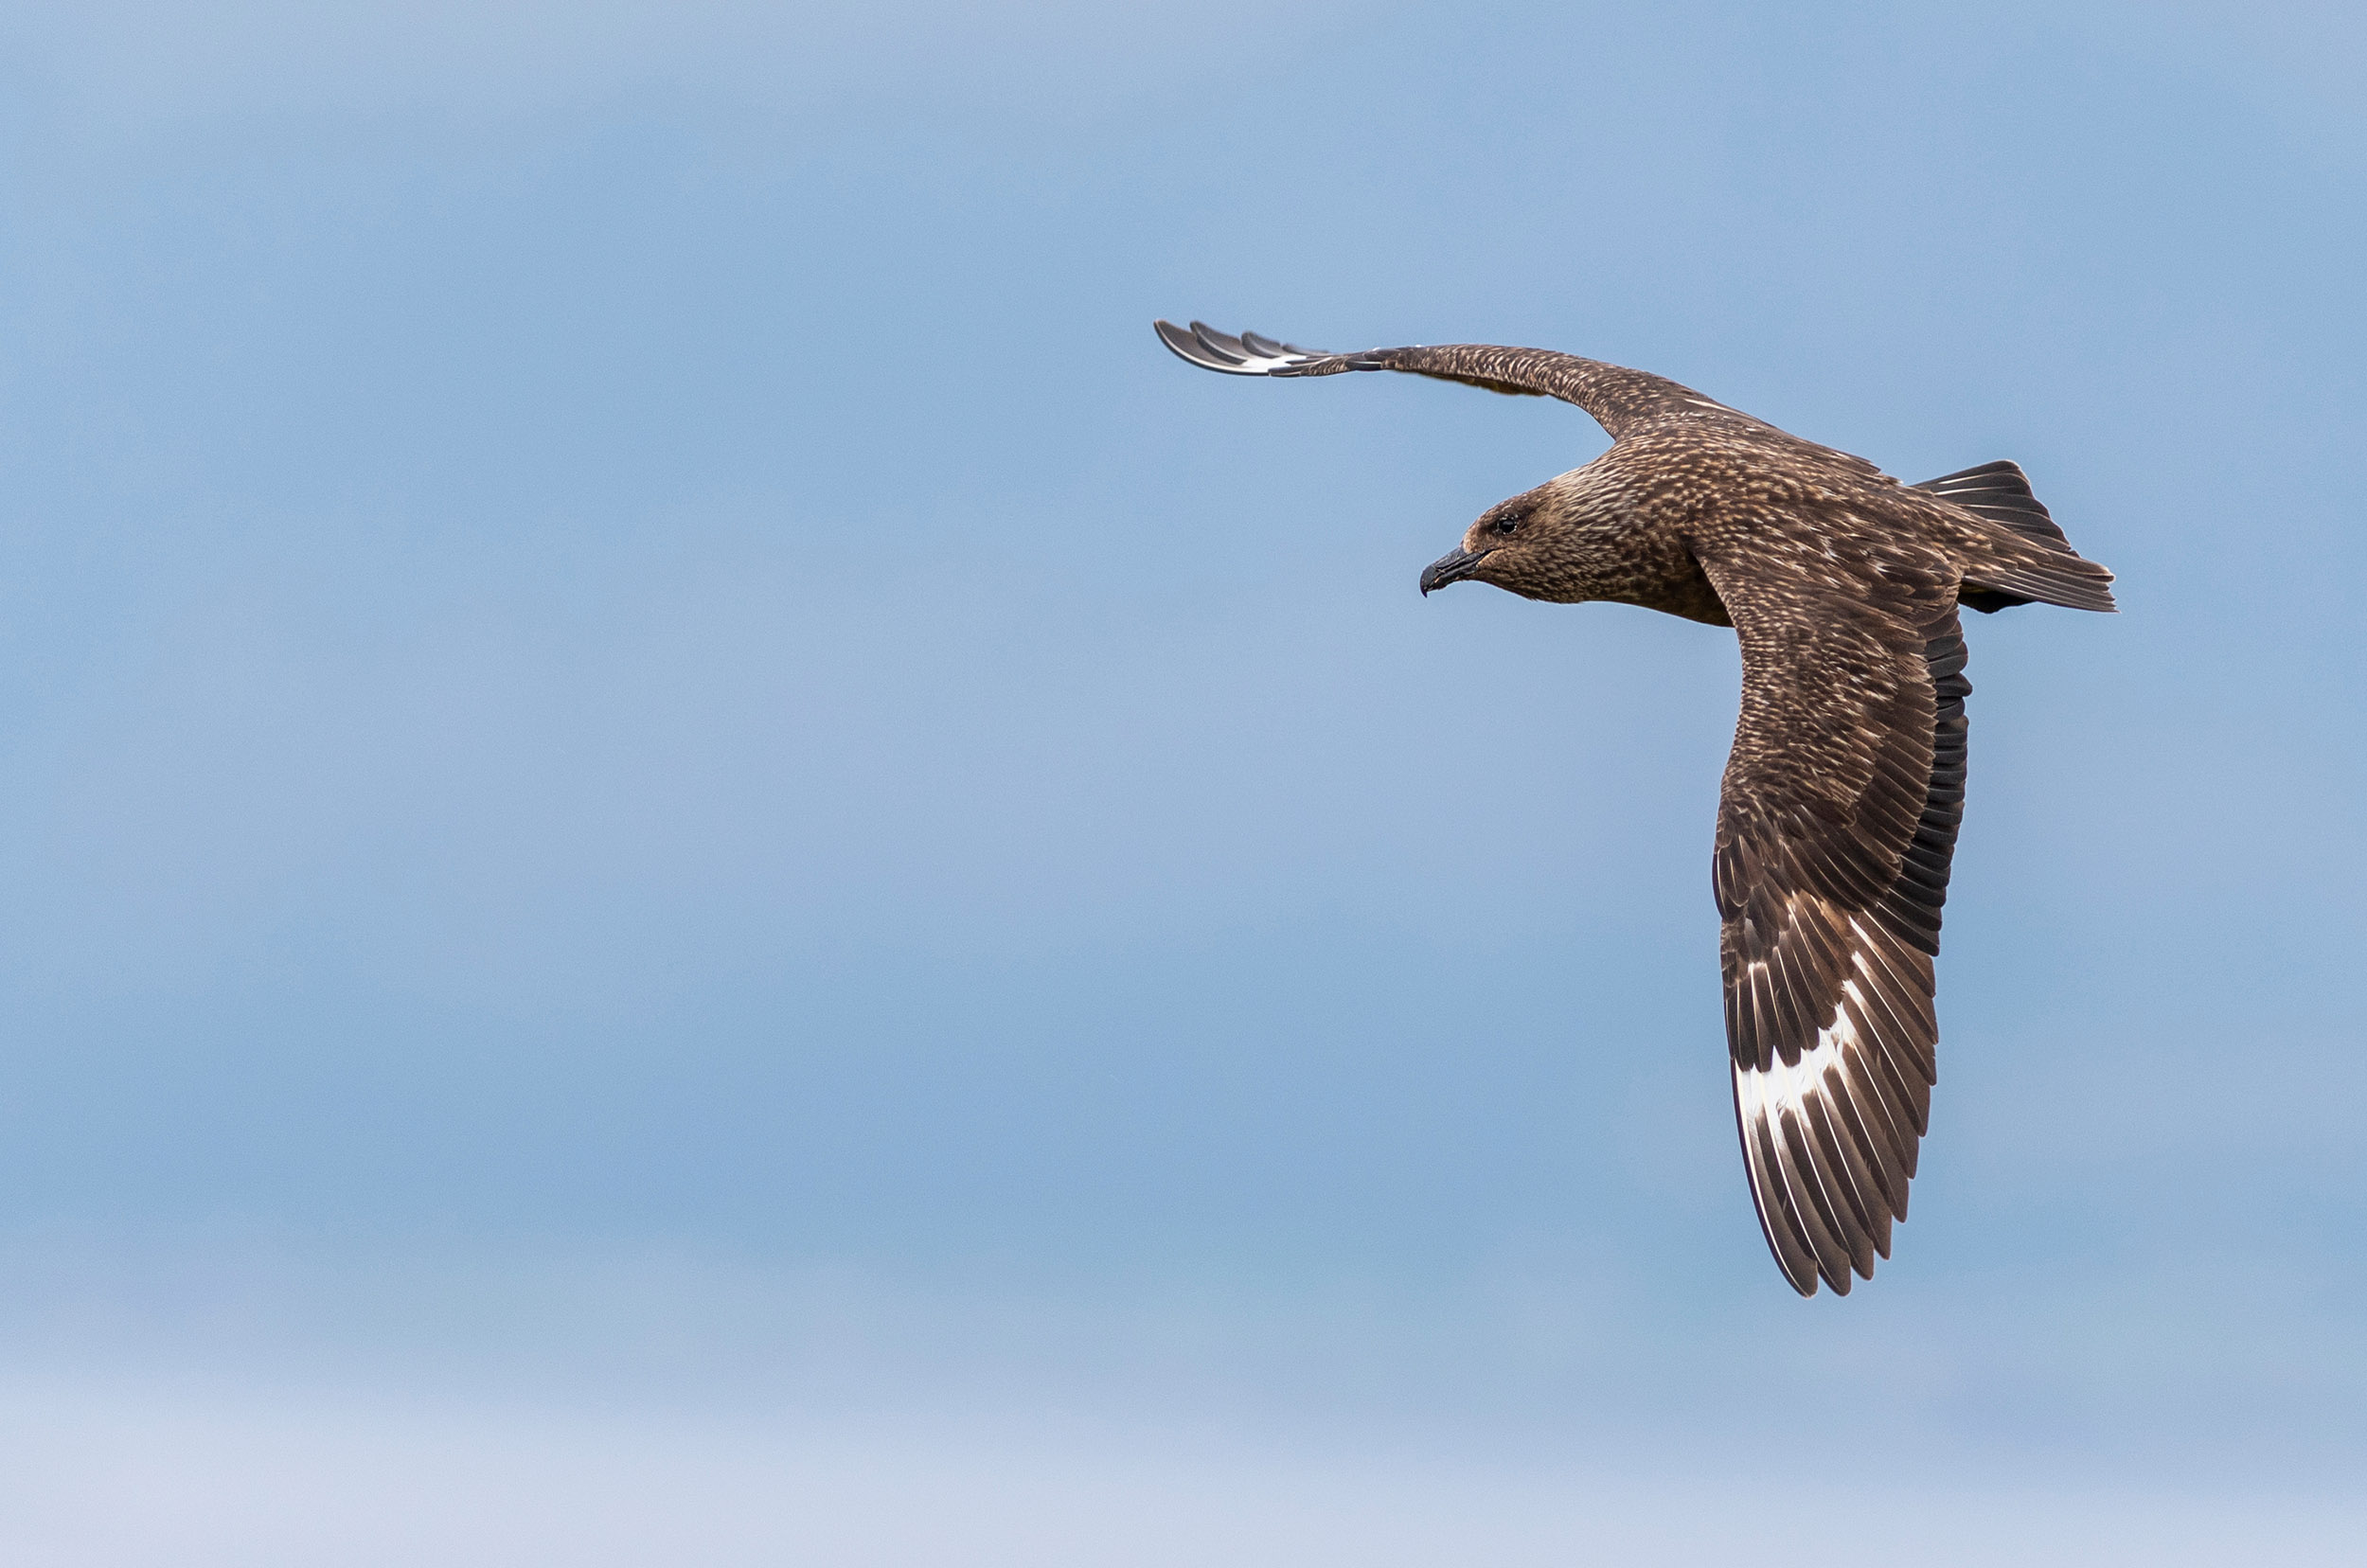 A lone Great Skua flying against a clear blue sky.